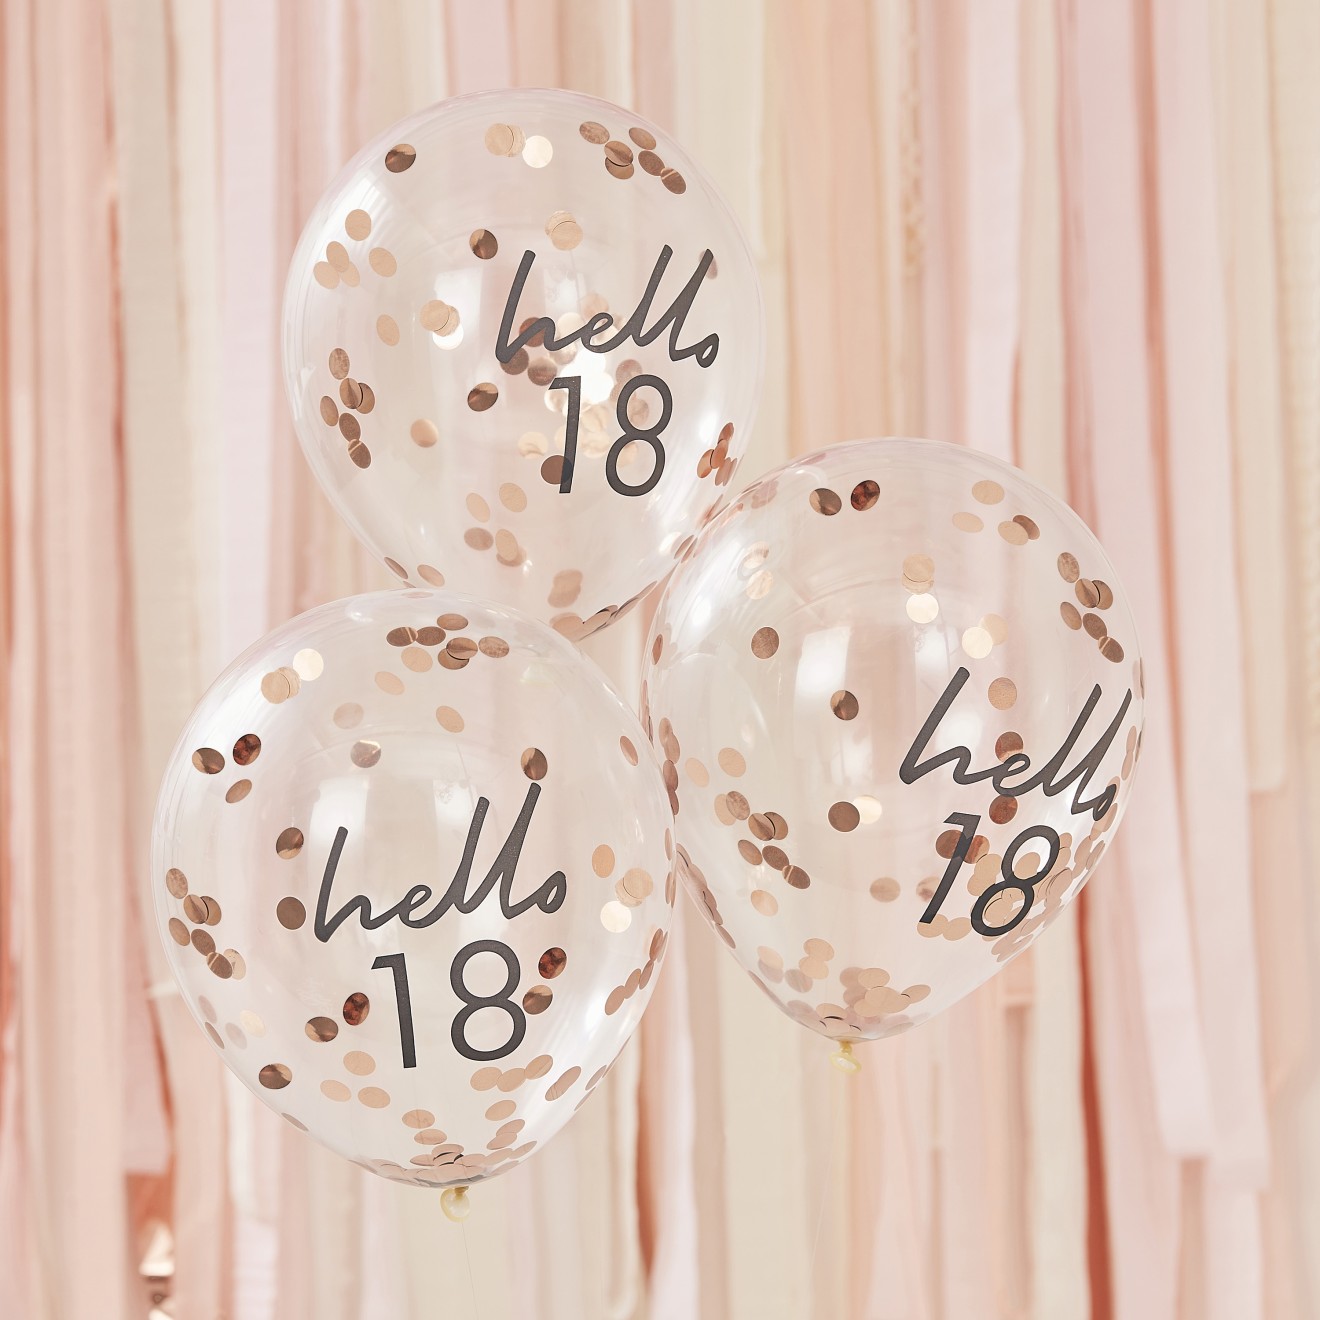 5 Rose Gold Confetti Filled 'Hello 18' Balloons